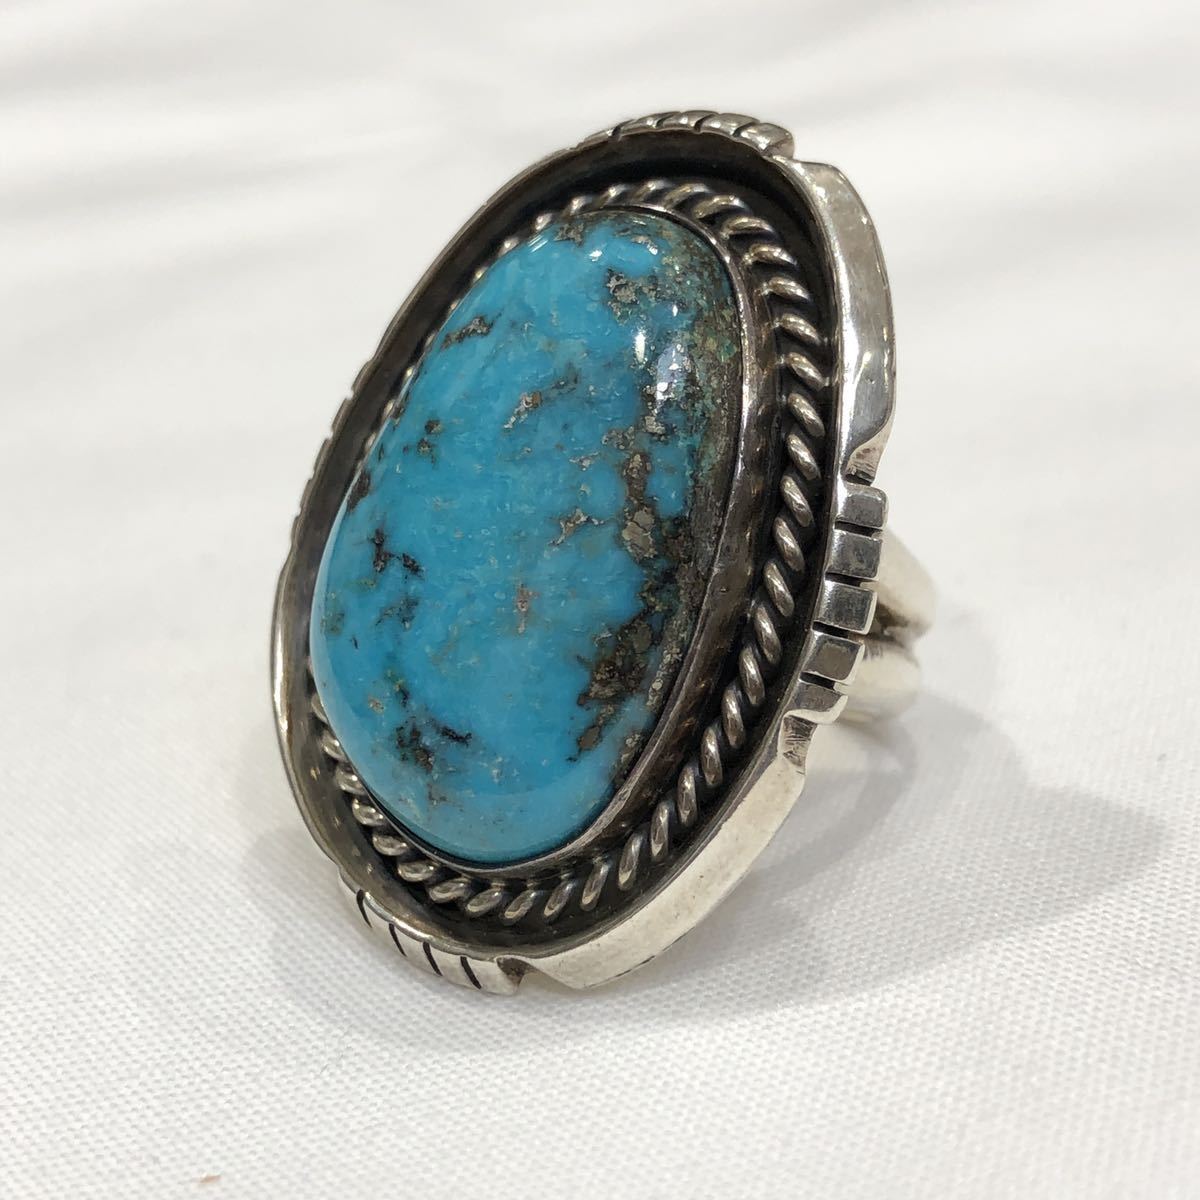  Navajo ring RT sculpture Indian jewelry silver 11 number turquoise Navajo group ring accessory ts202211